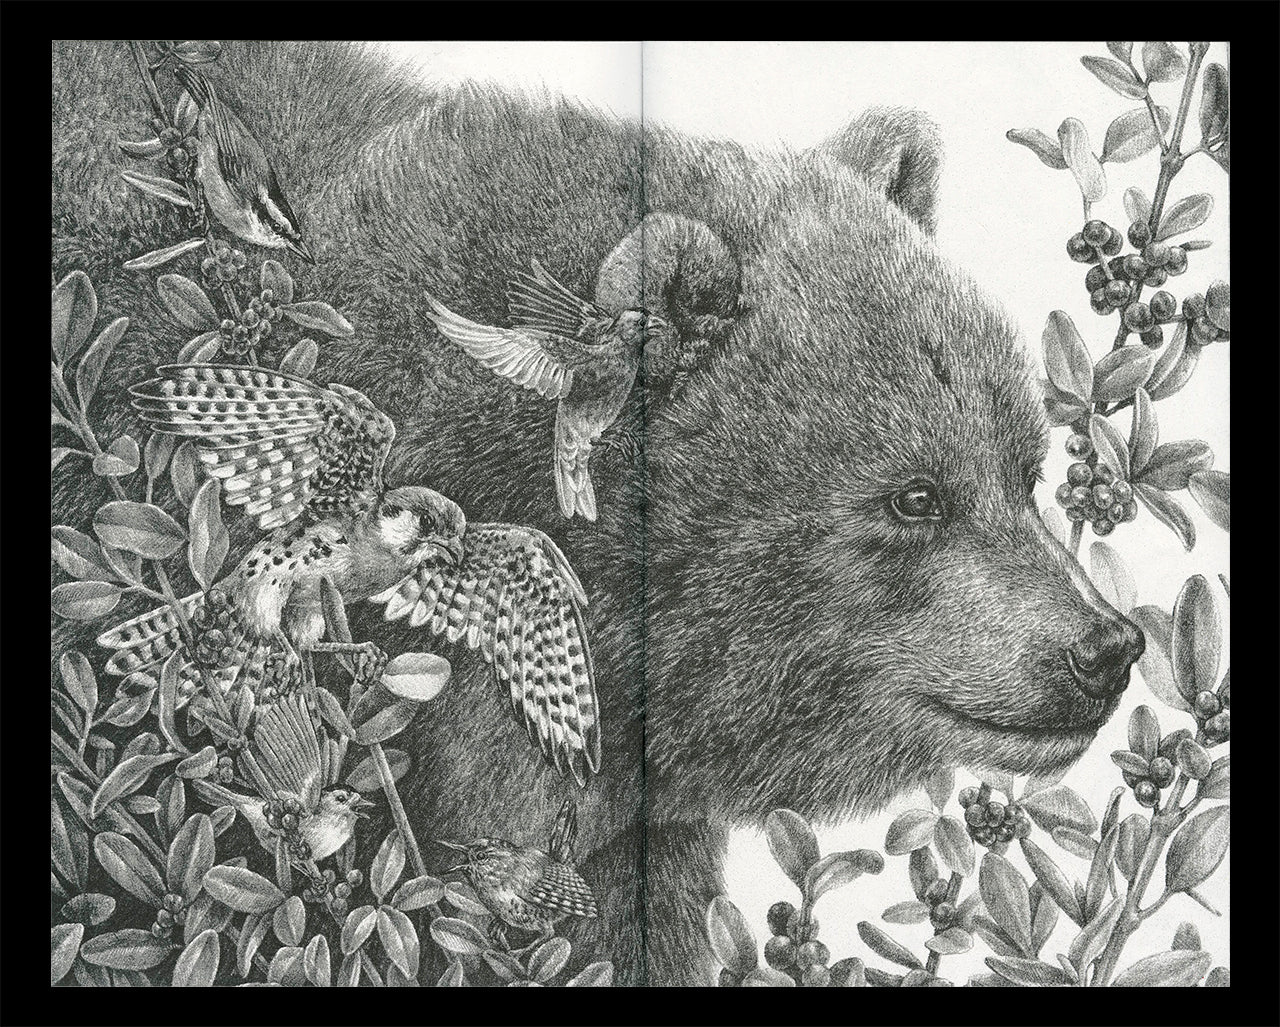 Interior spread of Zoe Keller's zine "Drawings" showing a graphite drawing of a bear